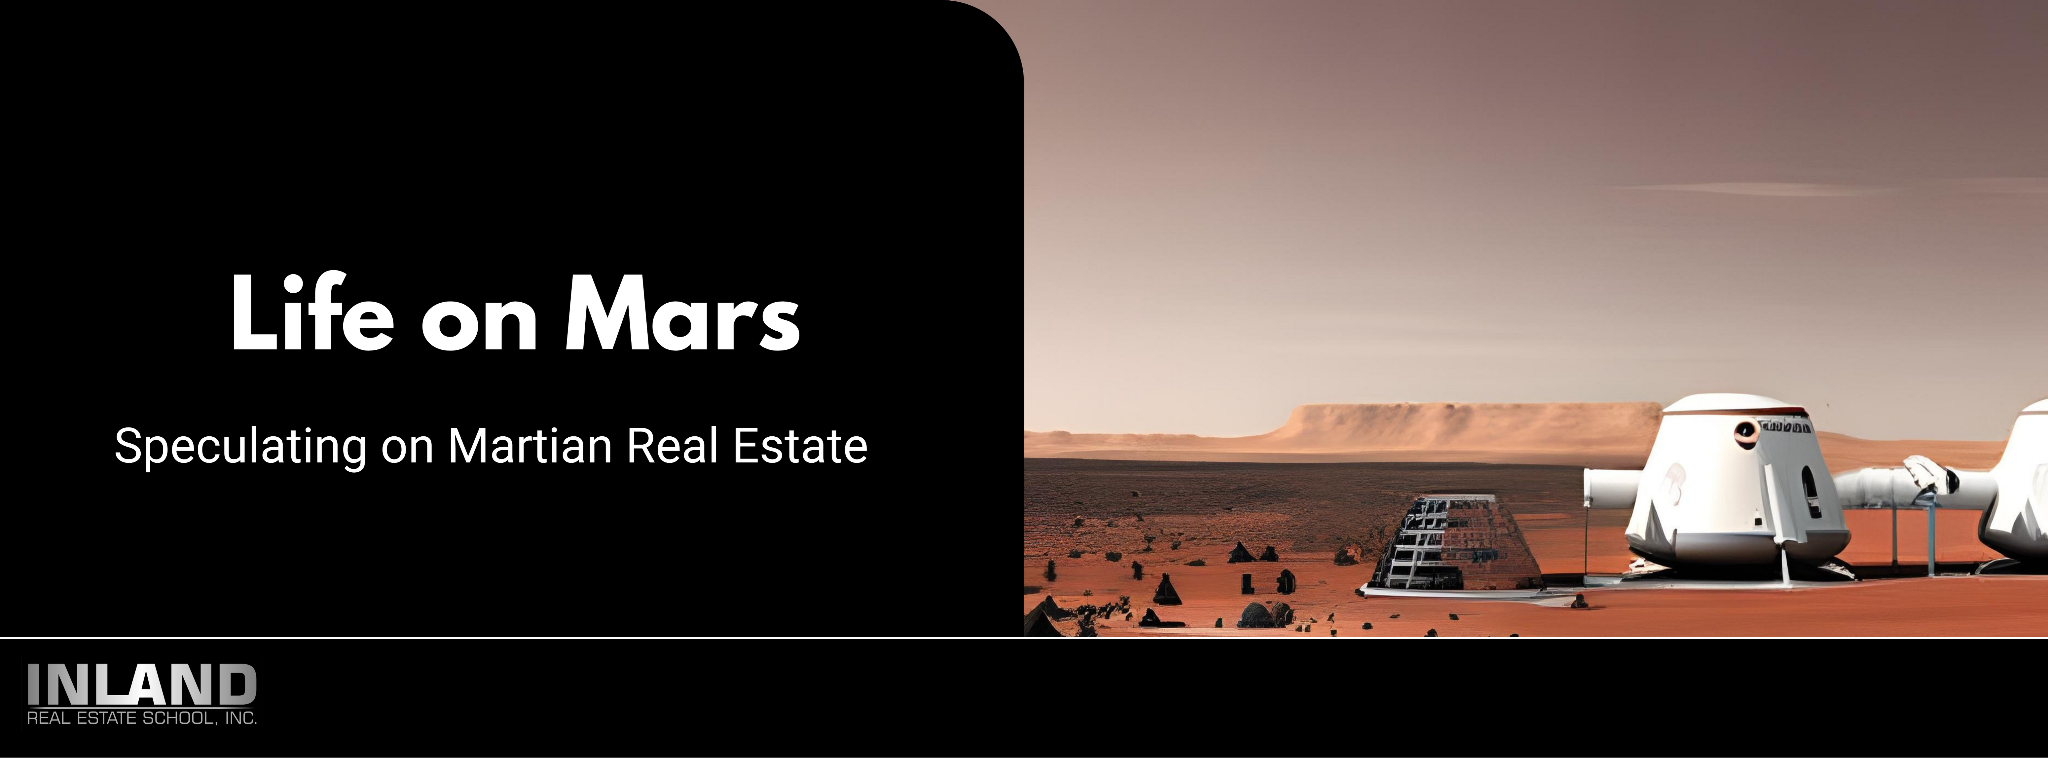 Life on Mars: Speculating on Martian Real Estate